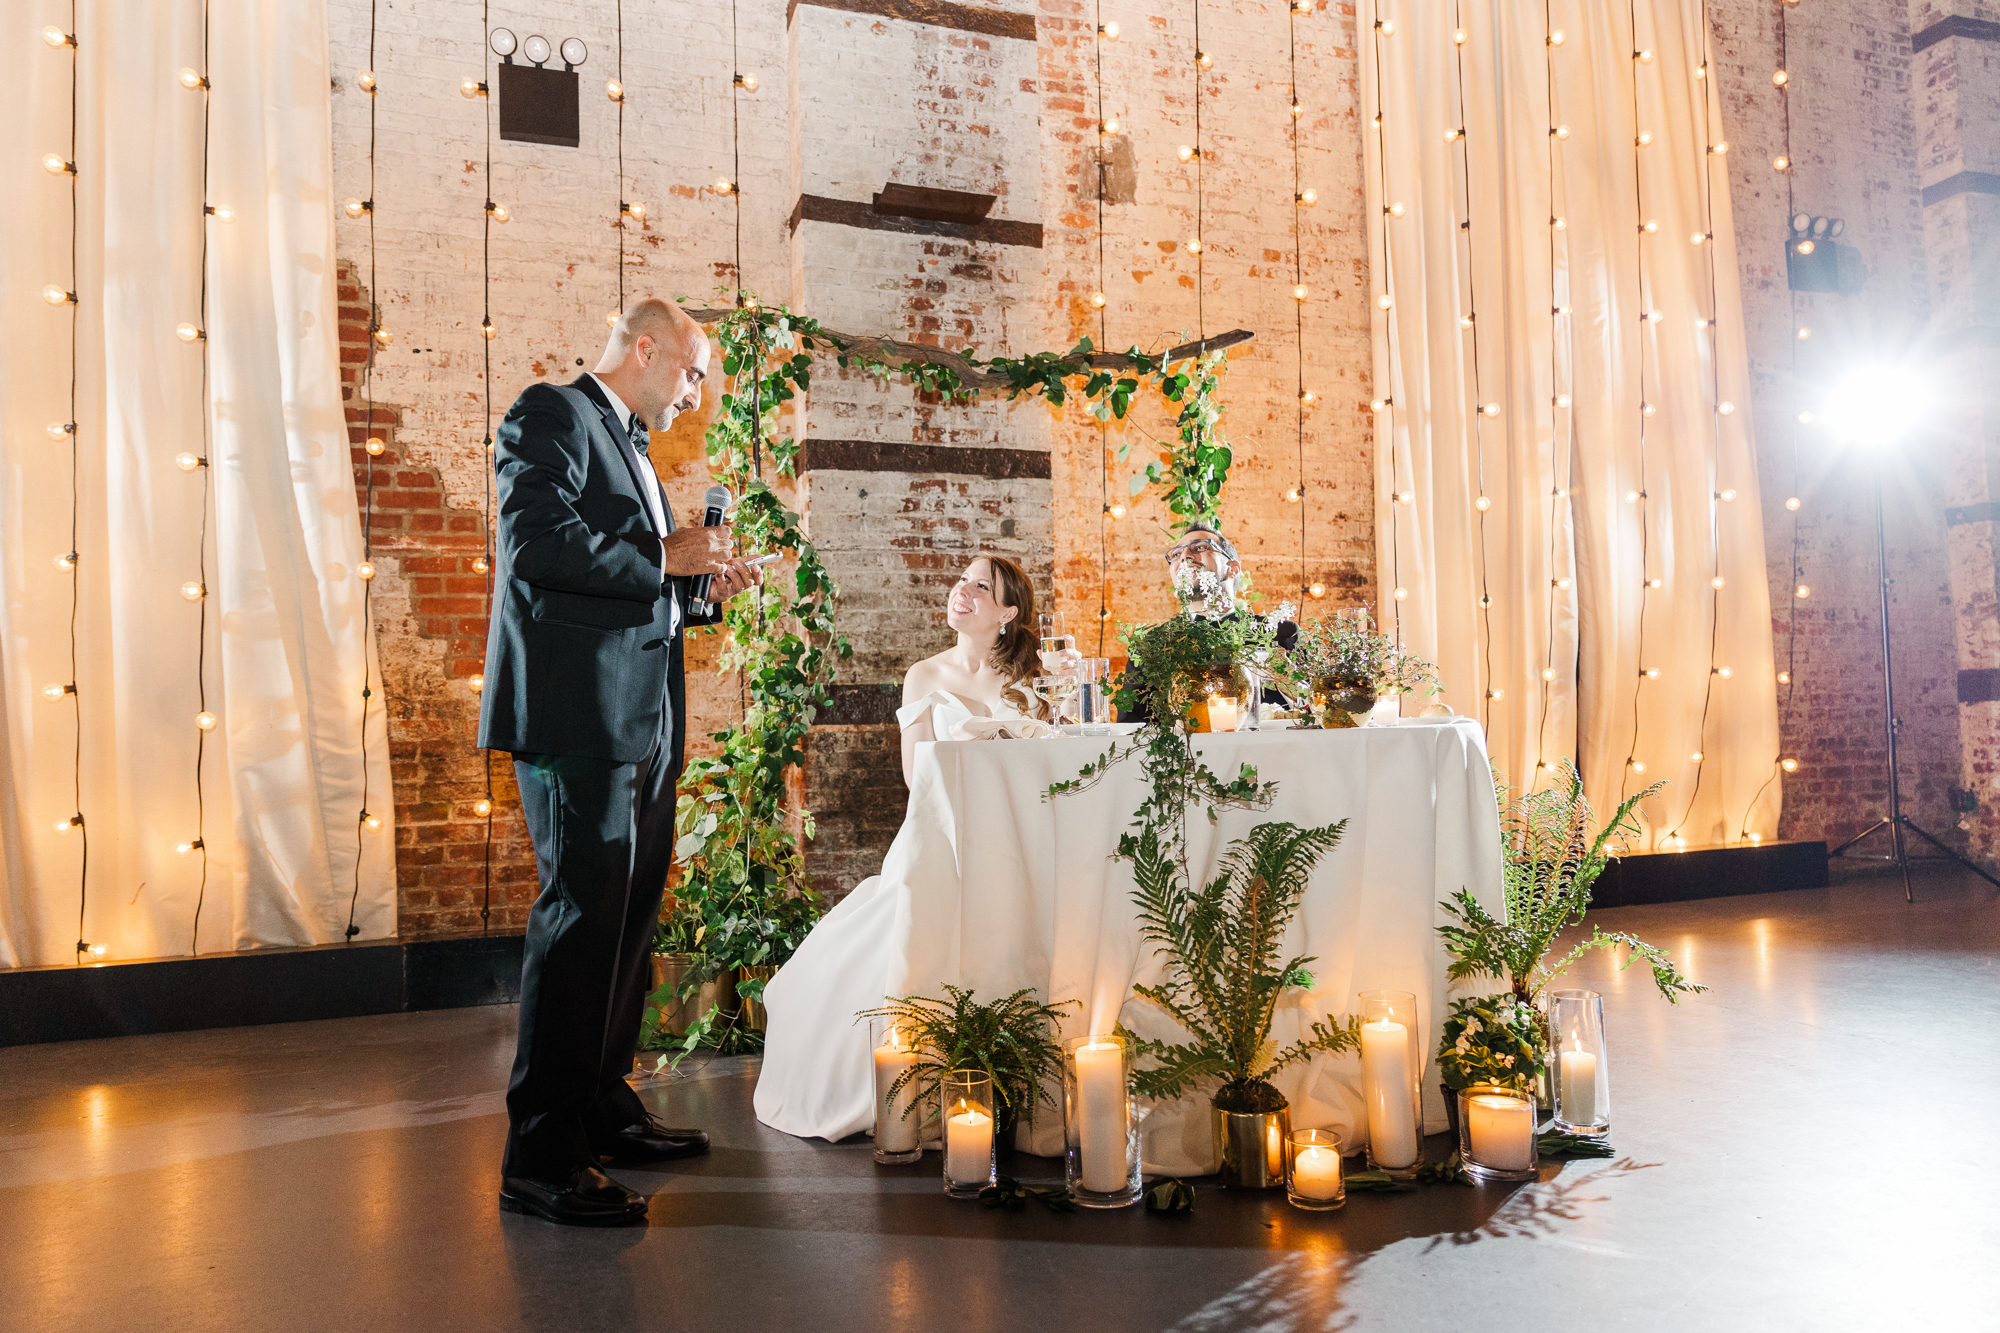 Charming Green Building Wedding Photography with Rustic Elements